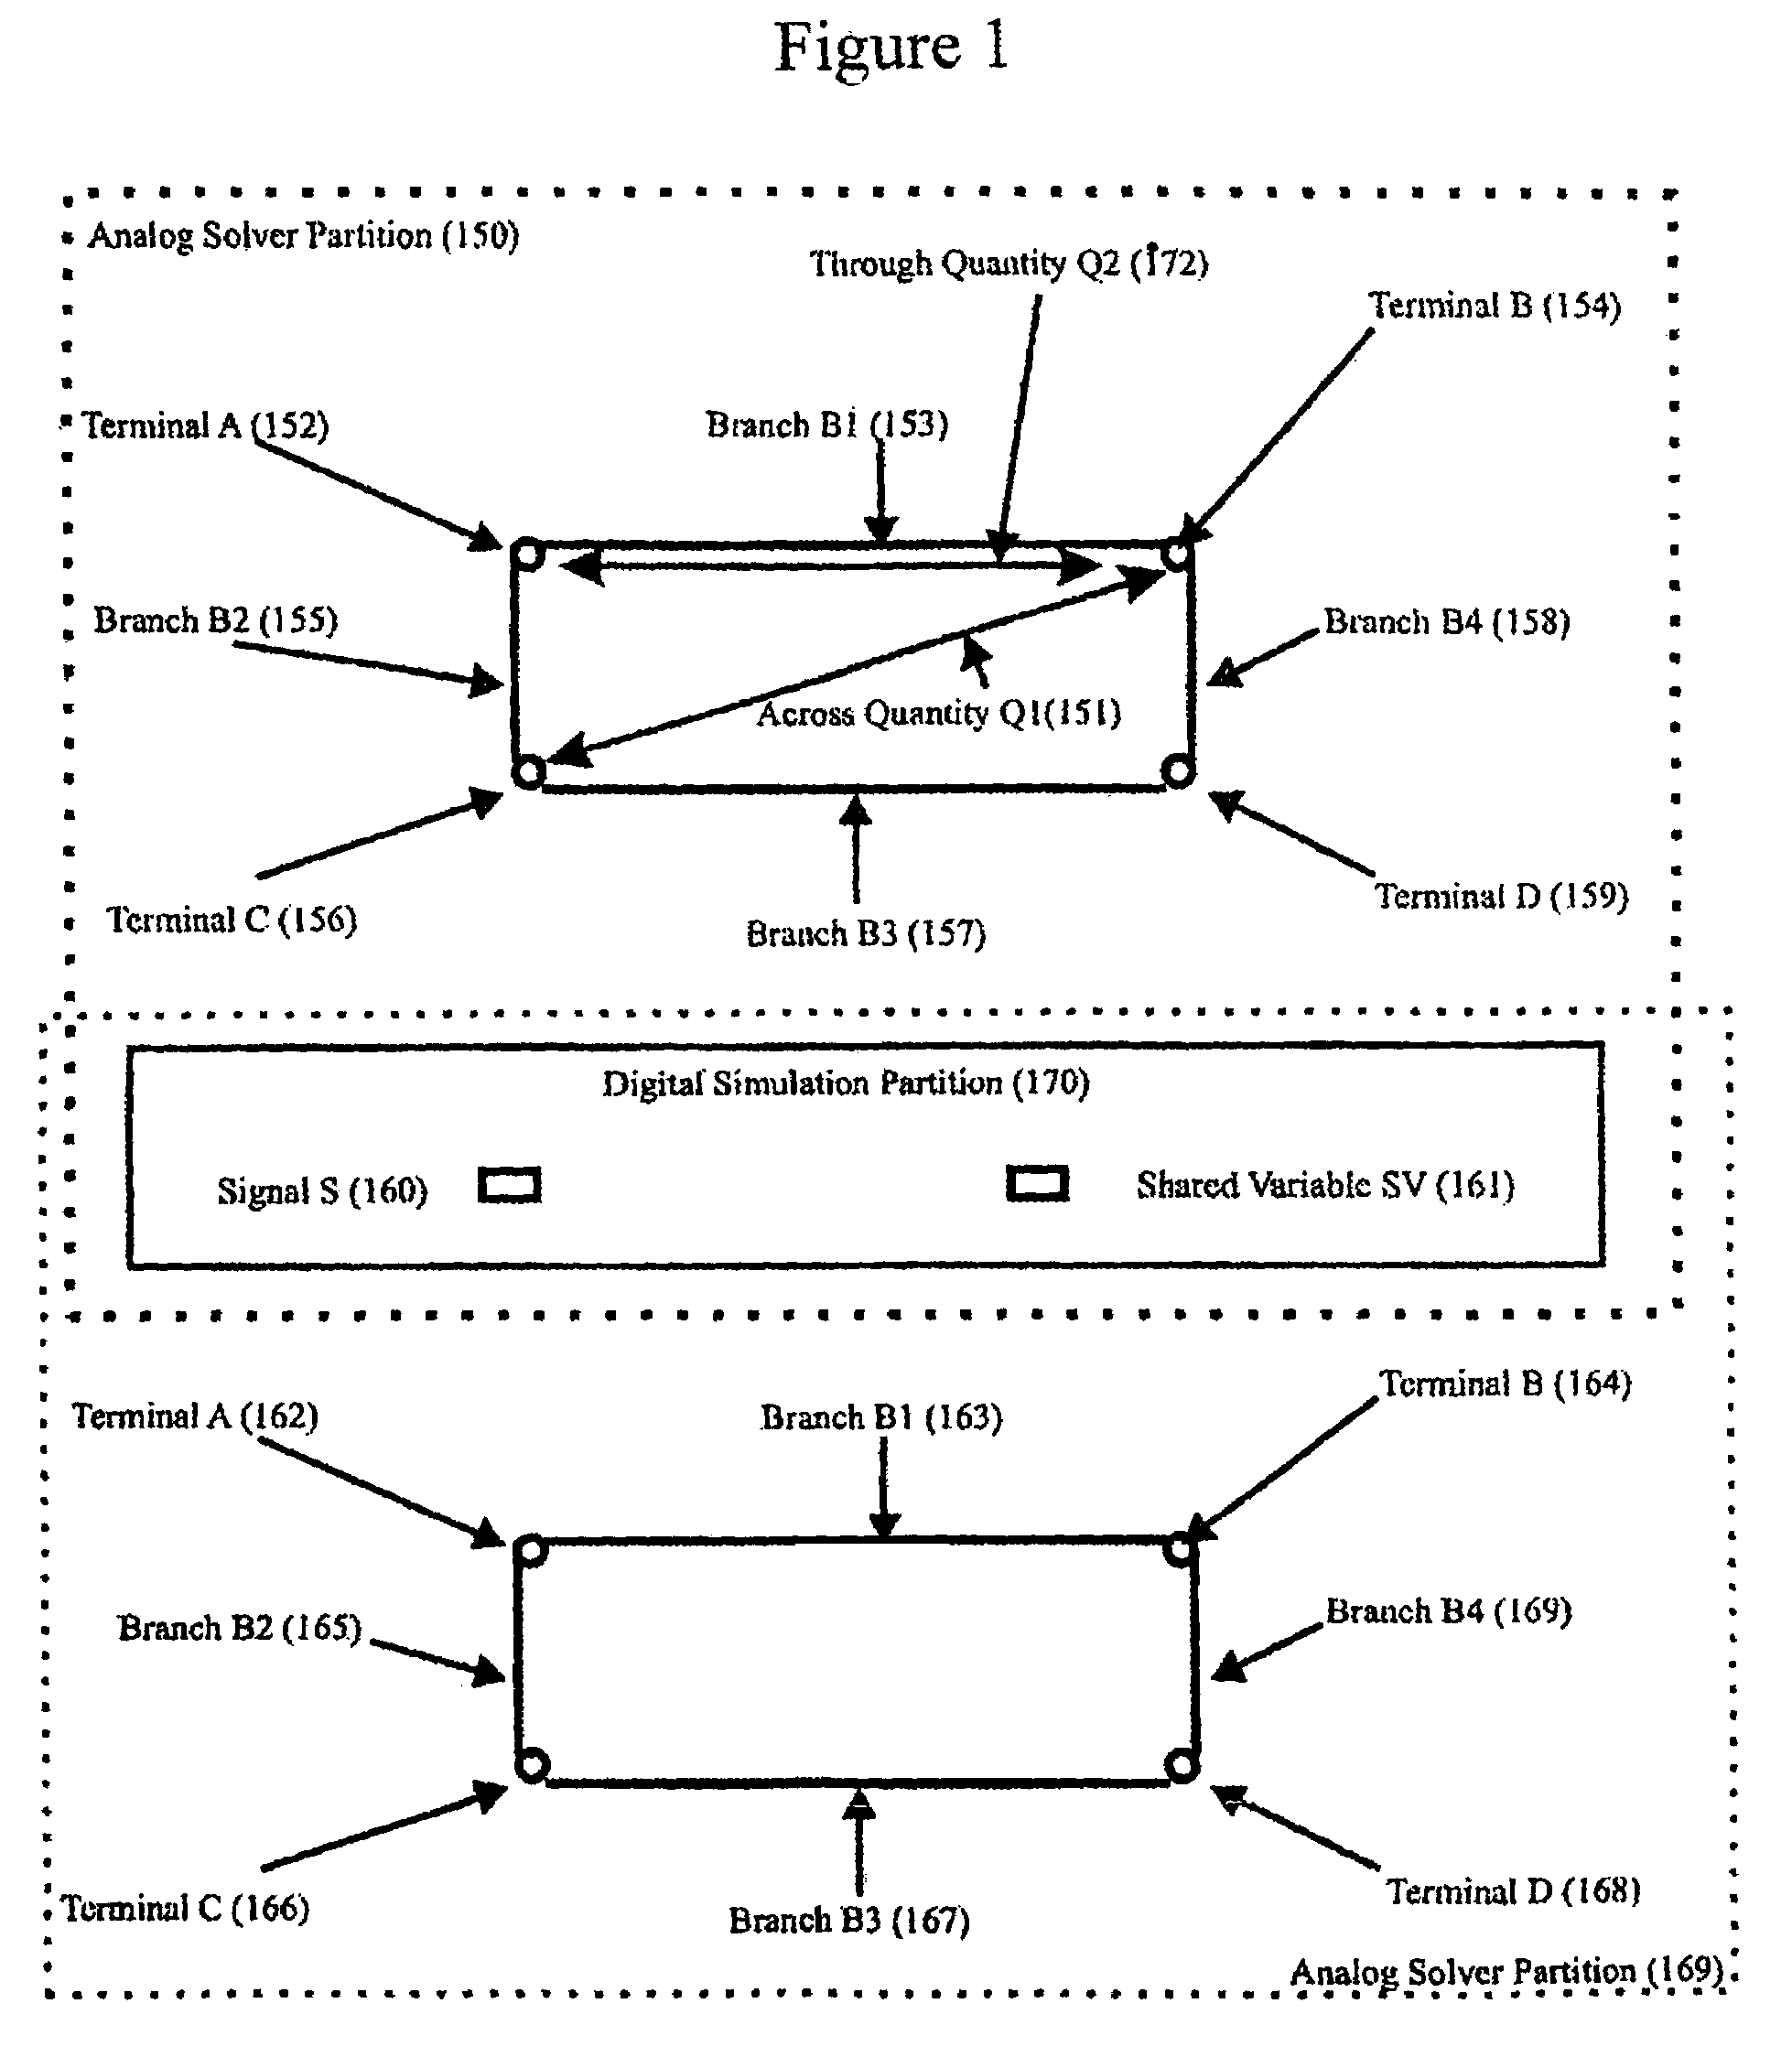 Semi-automatic generation of behavior models continuous value using iterative probing of a device or existing component model